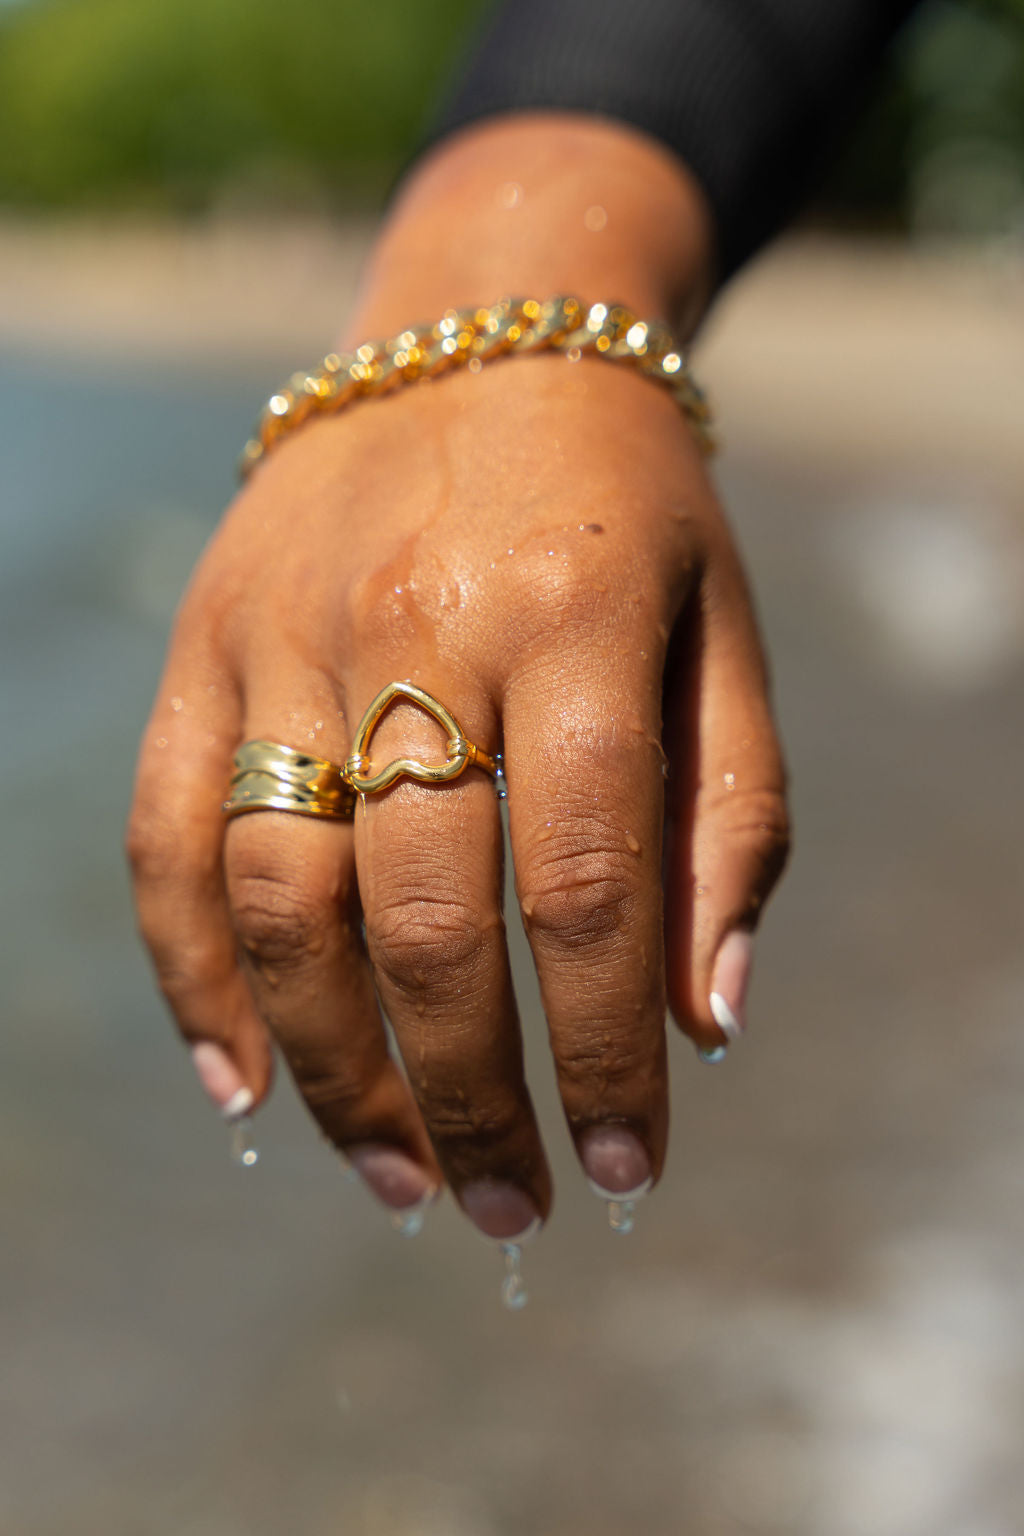 Model in a black top wearing 18k gold heart shaped ring. The model is also wearing another 18k gold ring on the ring finger and a chain bracelet. Ella's Element Hollow Heart Out Ring by E's Element.